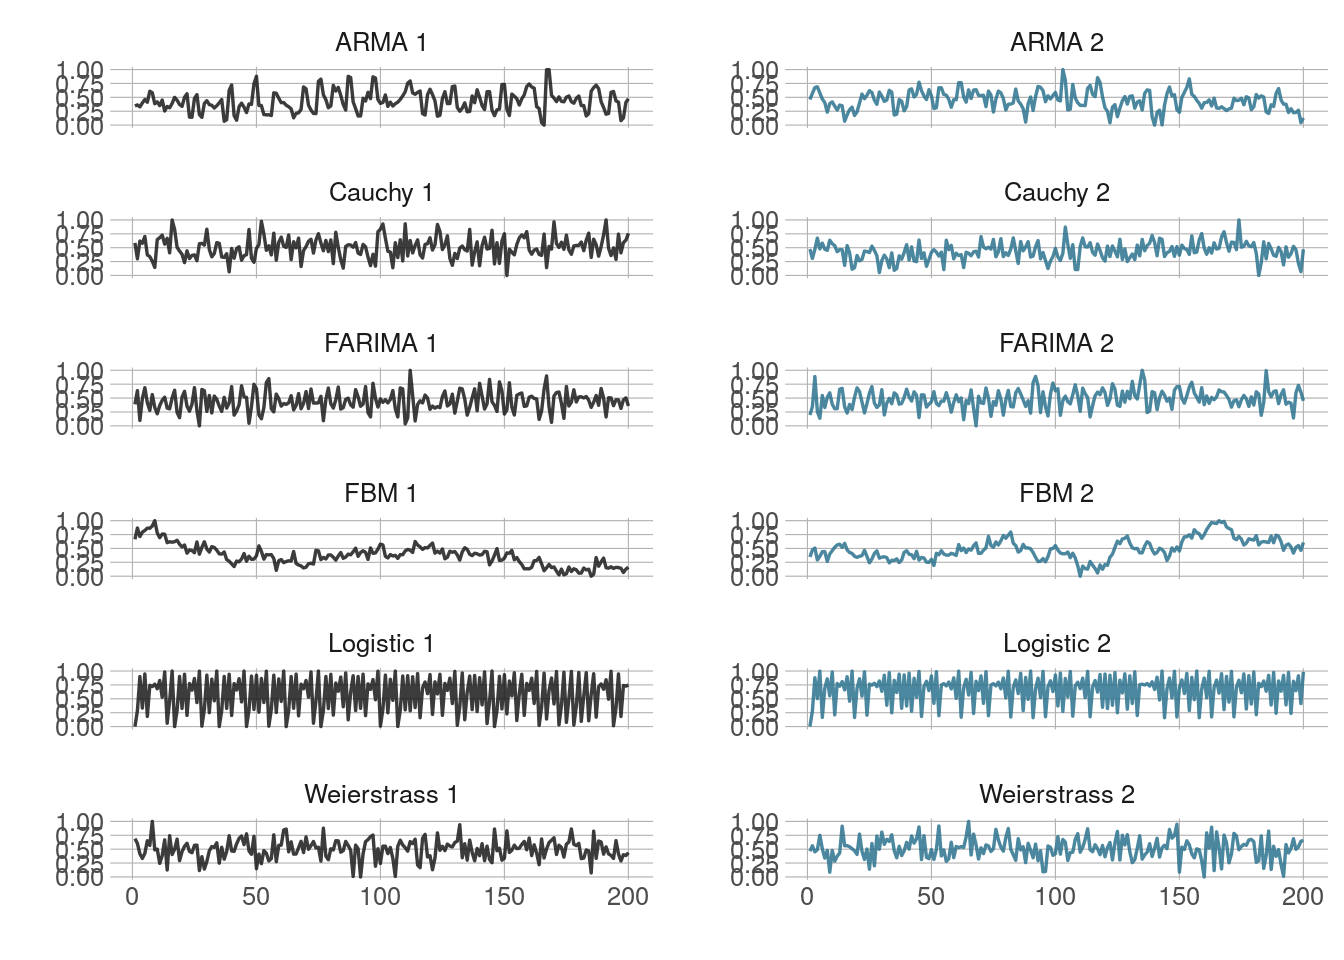 Single time series from each simulation group.